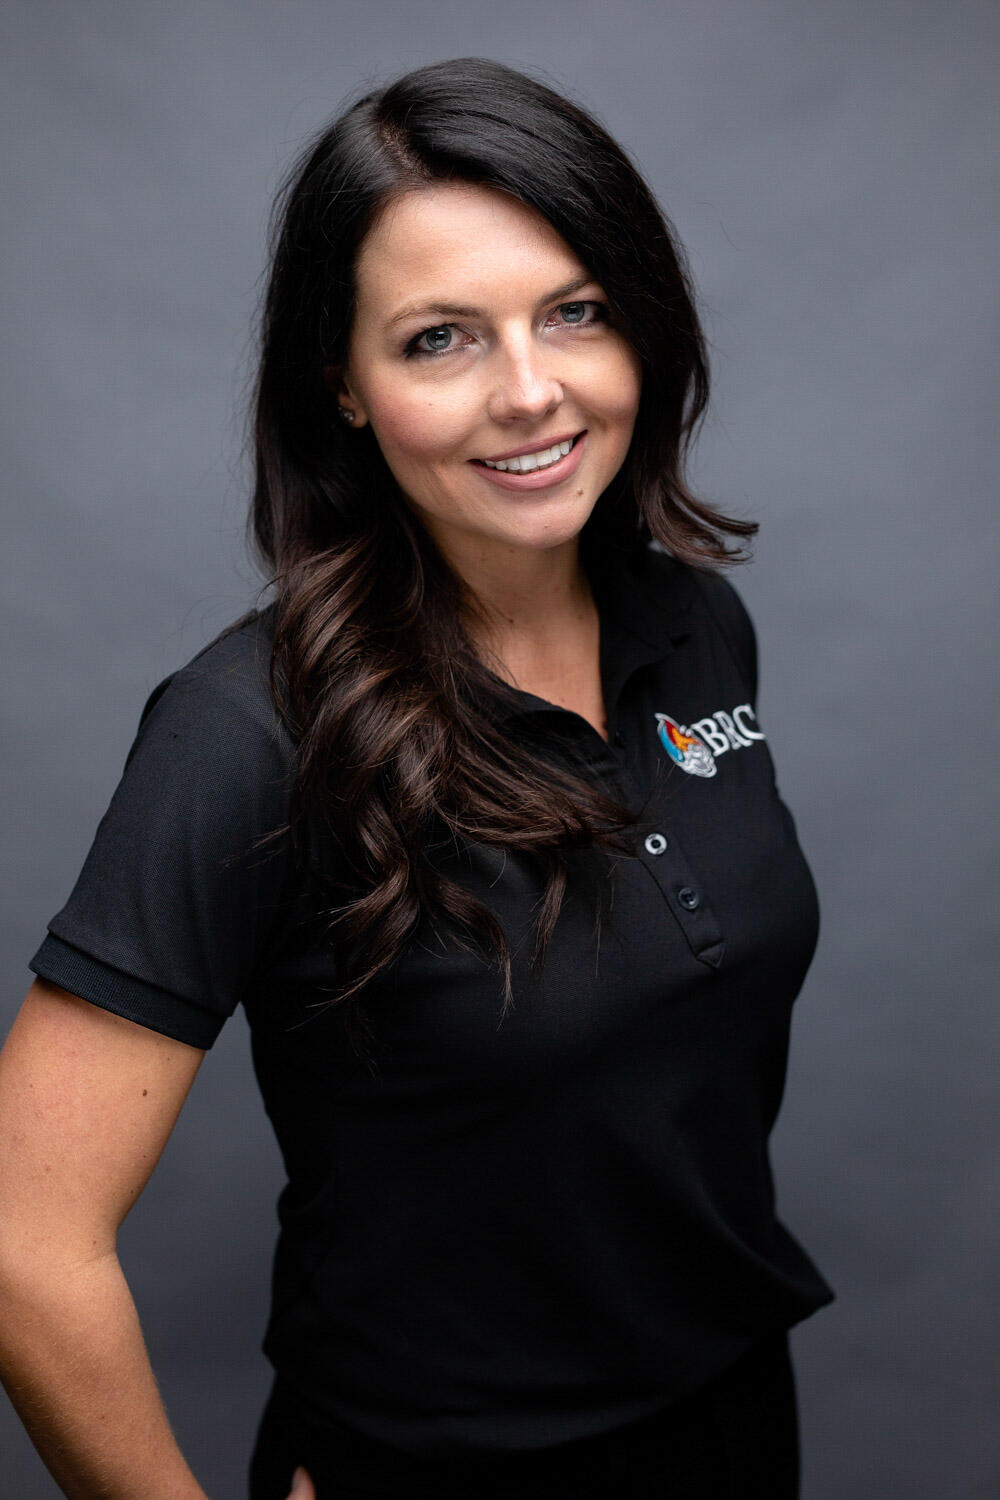 Nicole Humber, 34, CEO of Bravo Restoration & Construction in Windsor, is a 2023 North Bay Business Journal Forty Under 40 Award winner. The winners will be recognized Tuesday, April 25 at an event from 4 to 6 p.m. at Saralee and Richards Barn at the Sonoma County Fairgrounds.